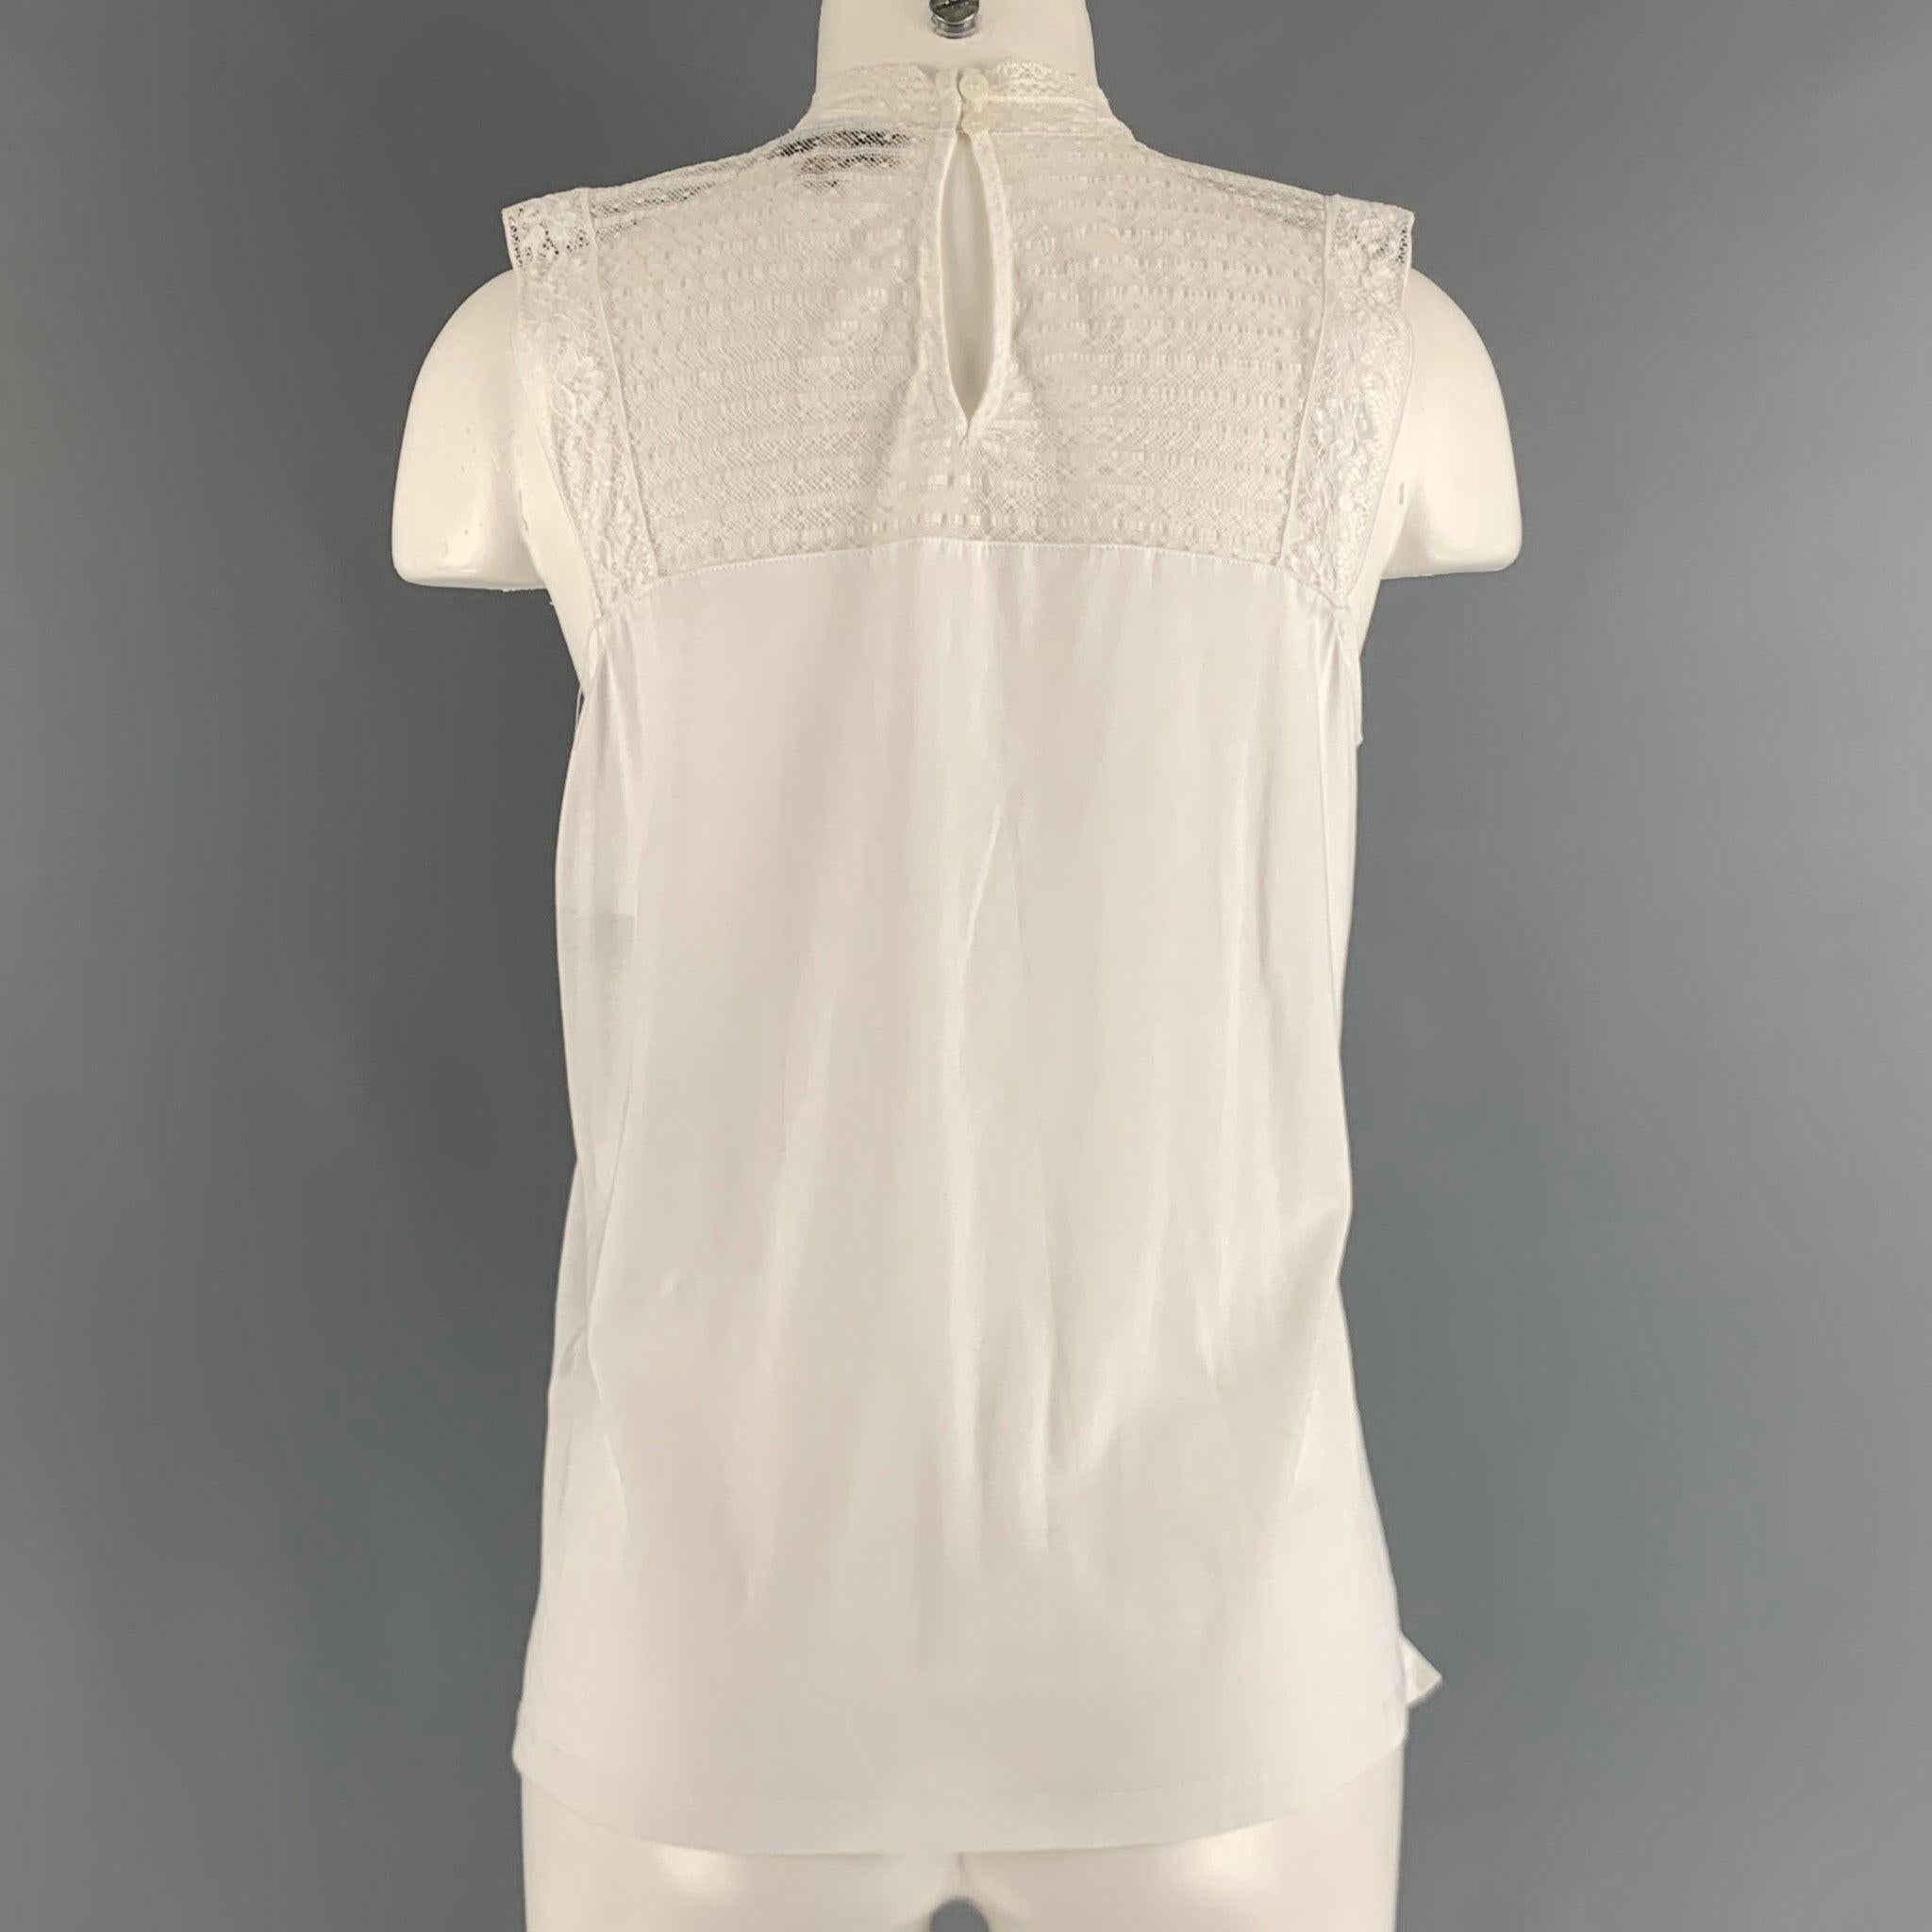 BURBERRY LONDON Size M White Cotton Sleeveless Casual Top For Sale 1